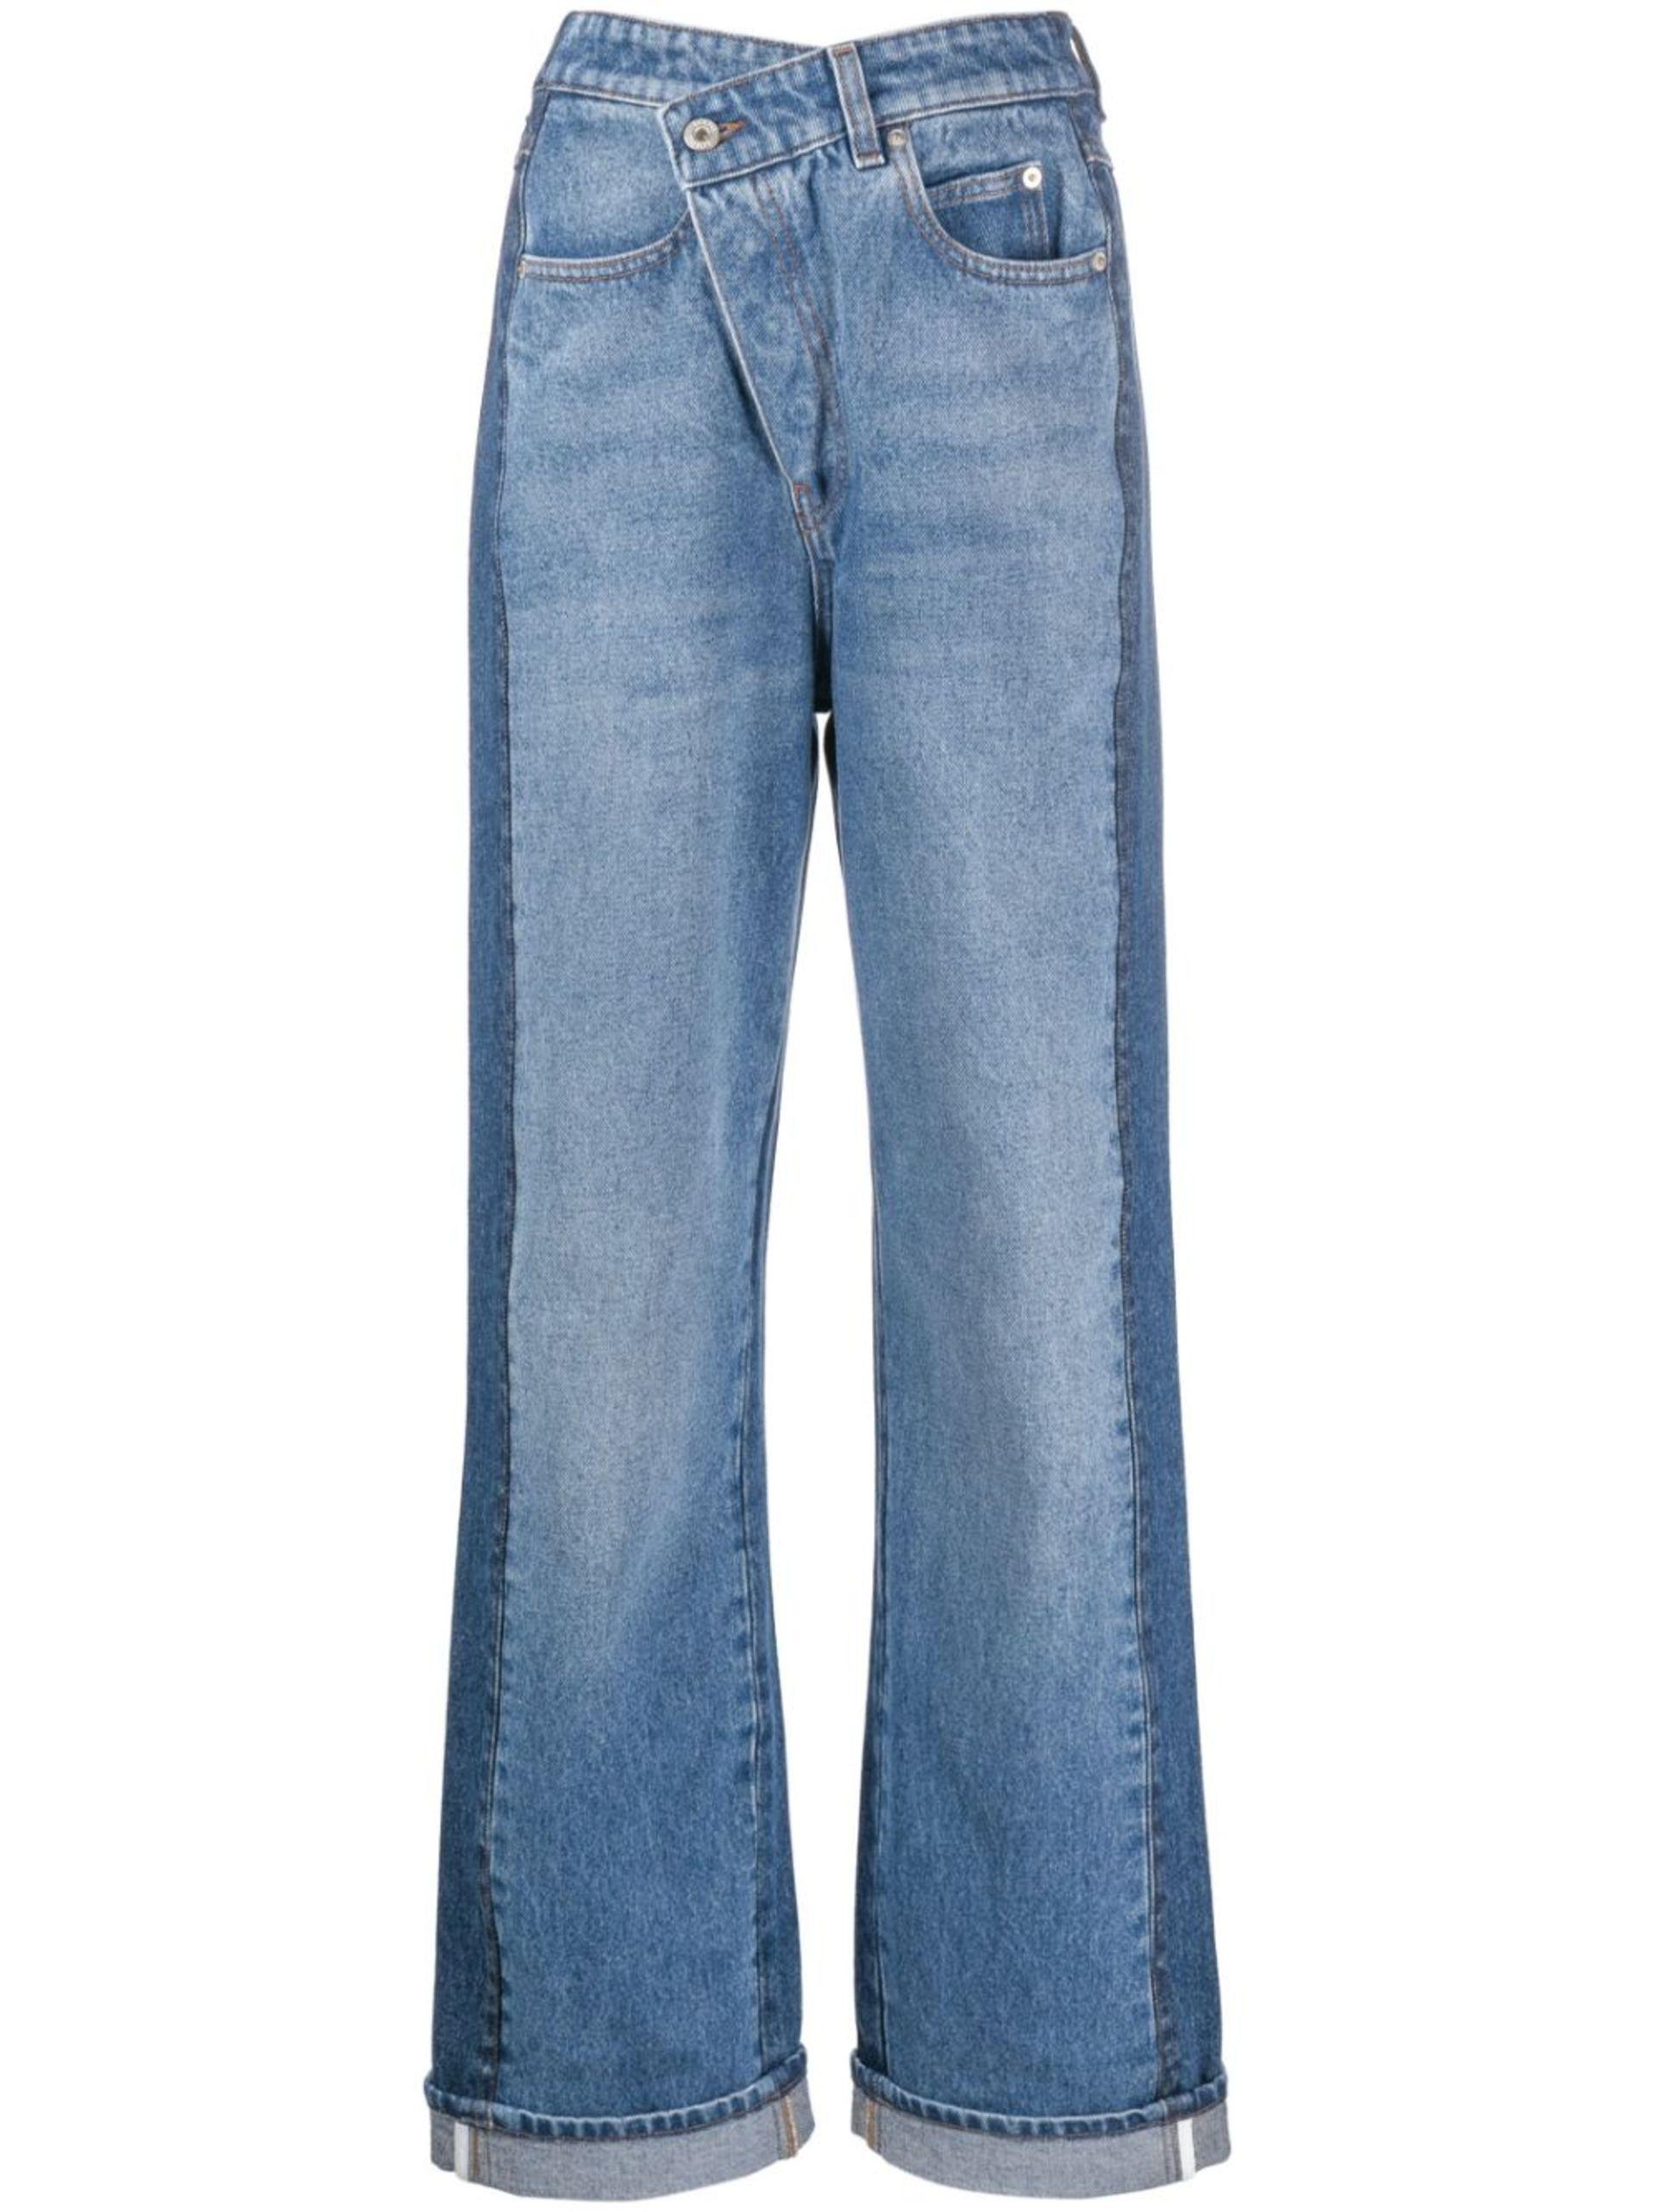 Loewe Two-tone Deconstructed Jeans in Blue | Lyst